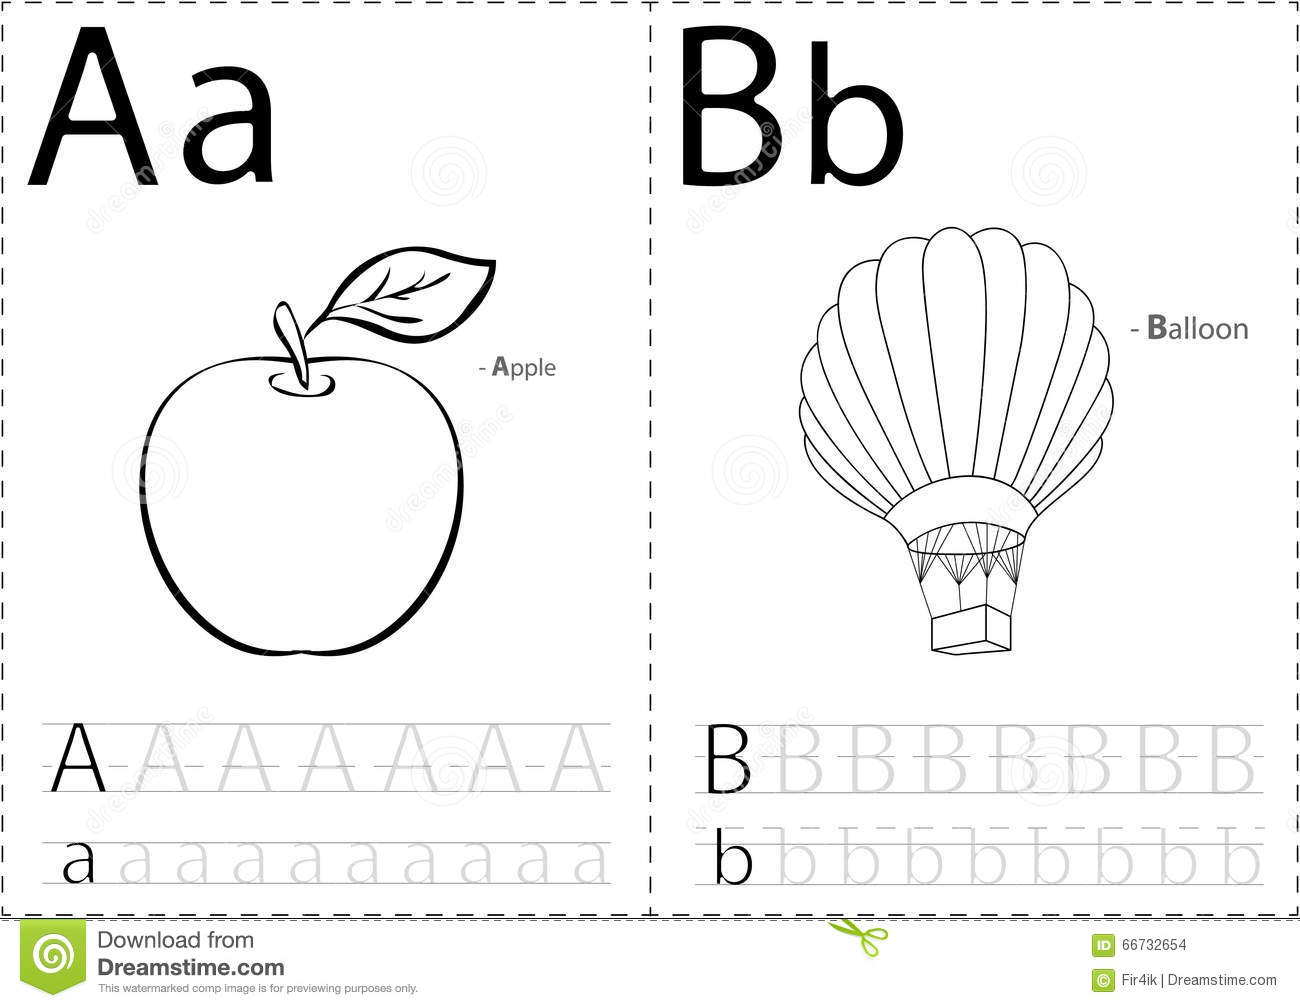 Cartoon Apple And Balloon. Alphabet Tracing Worksheet pertaining to Tracing Letters Booklet